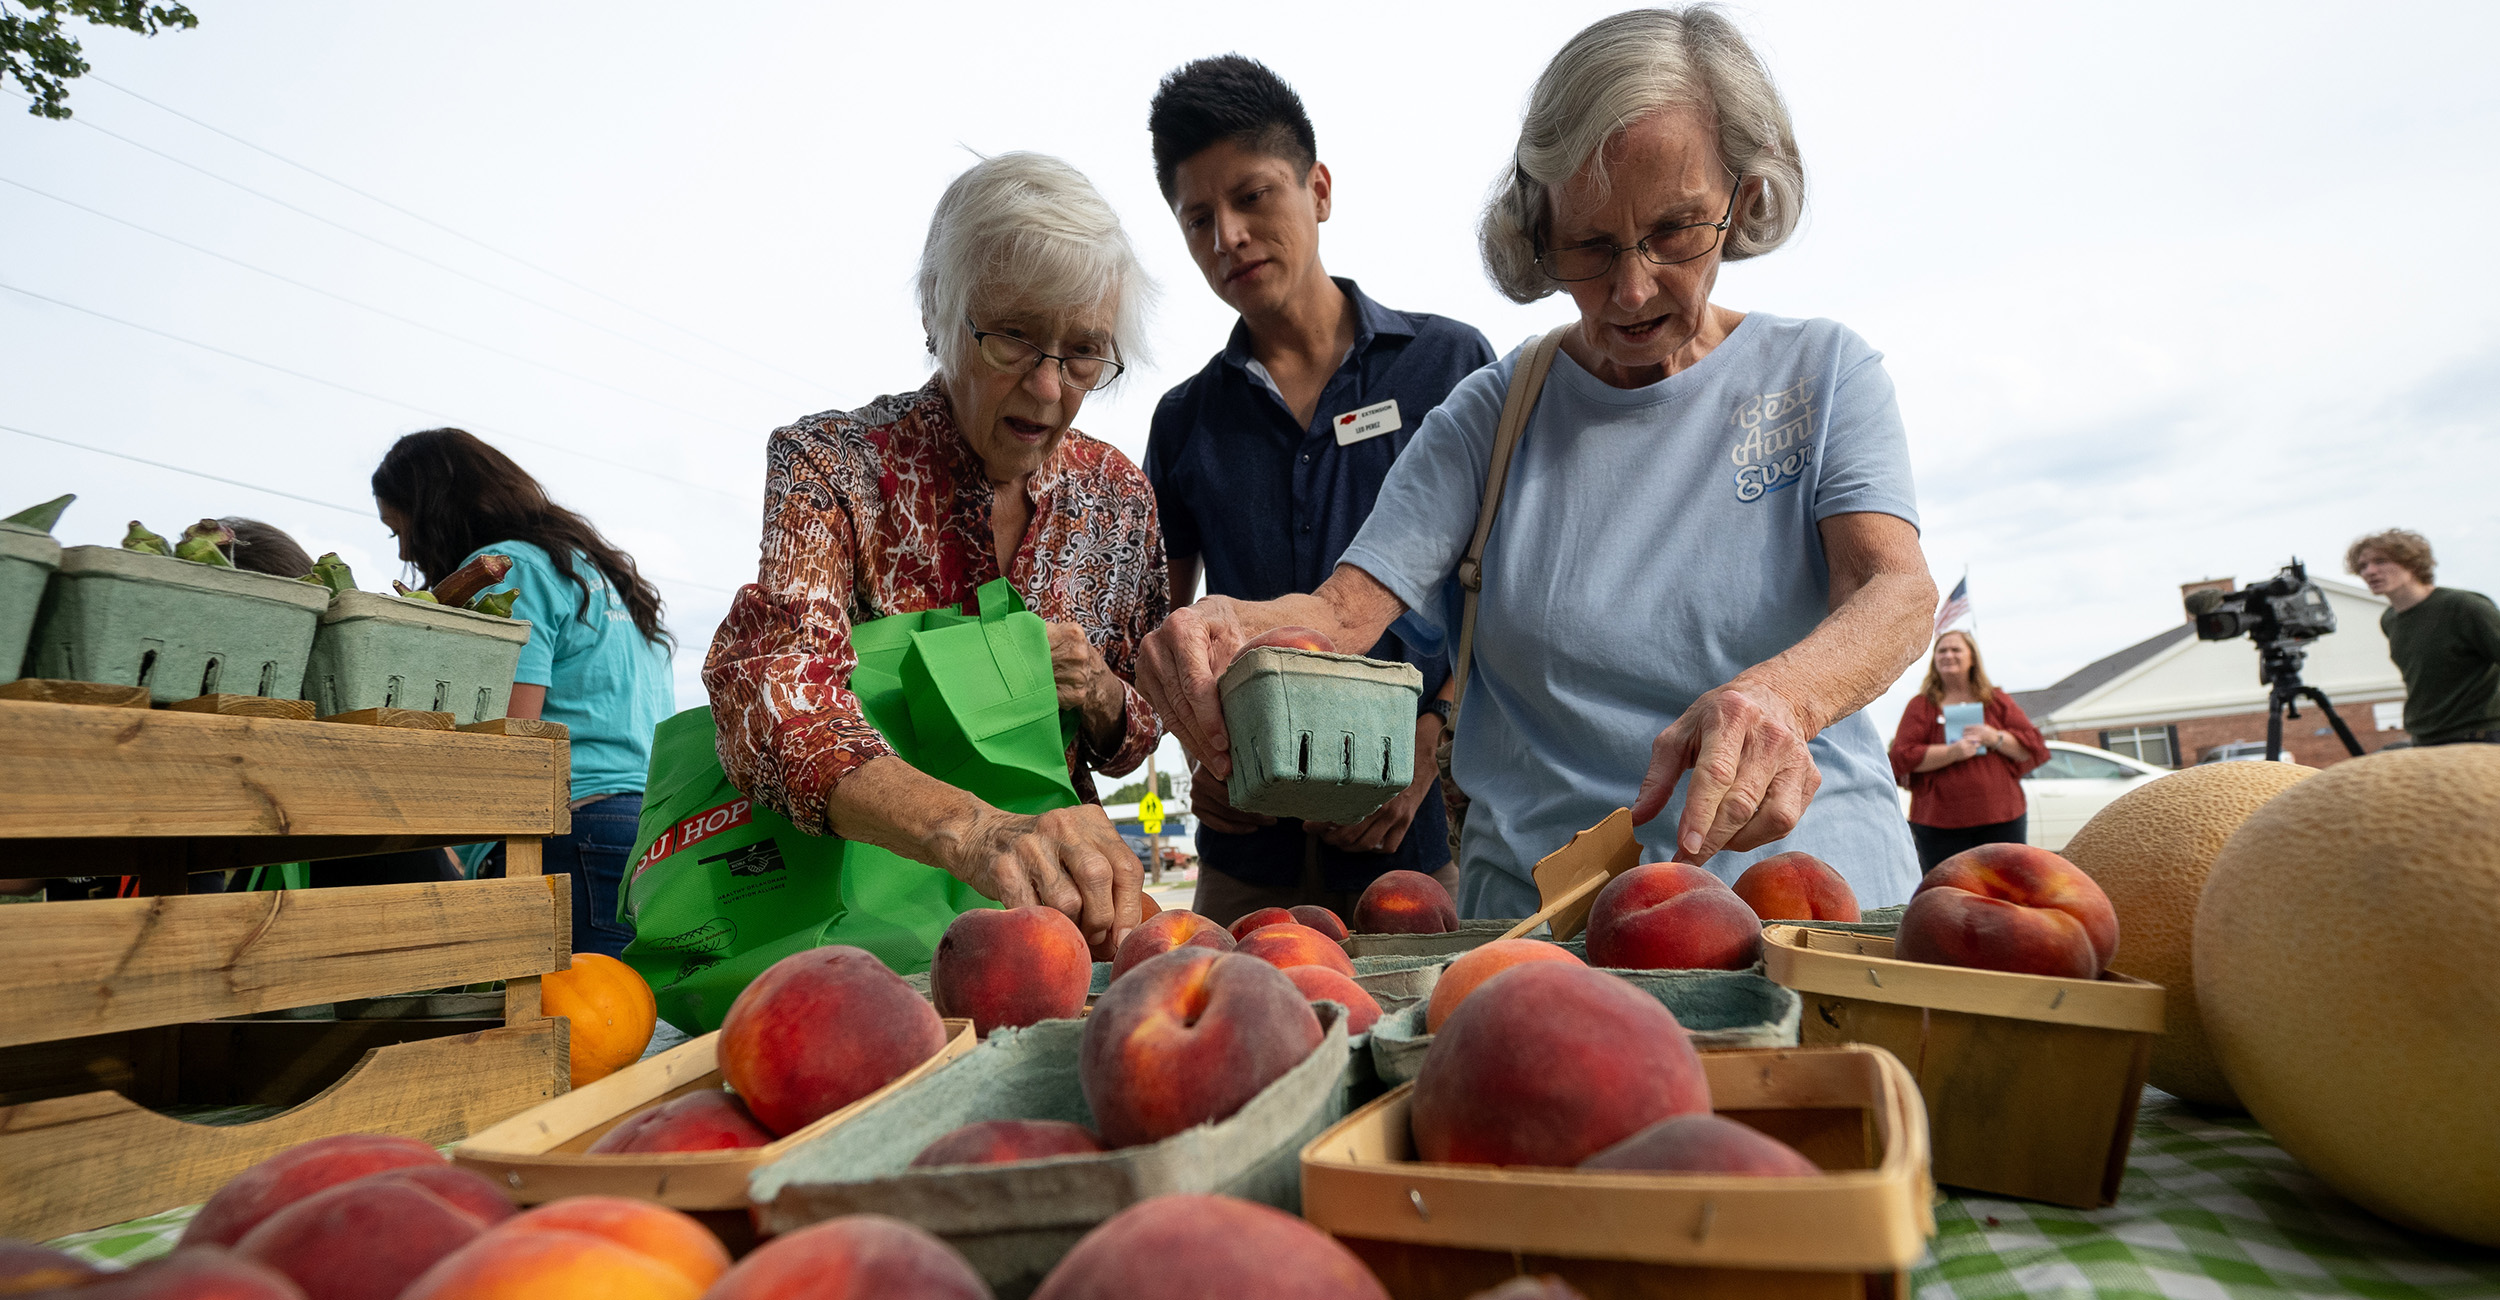 People selecting fresh produce at a farmers market.